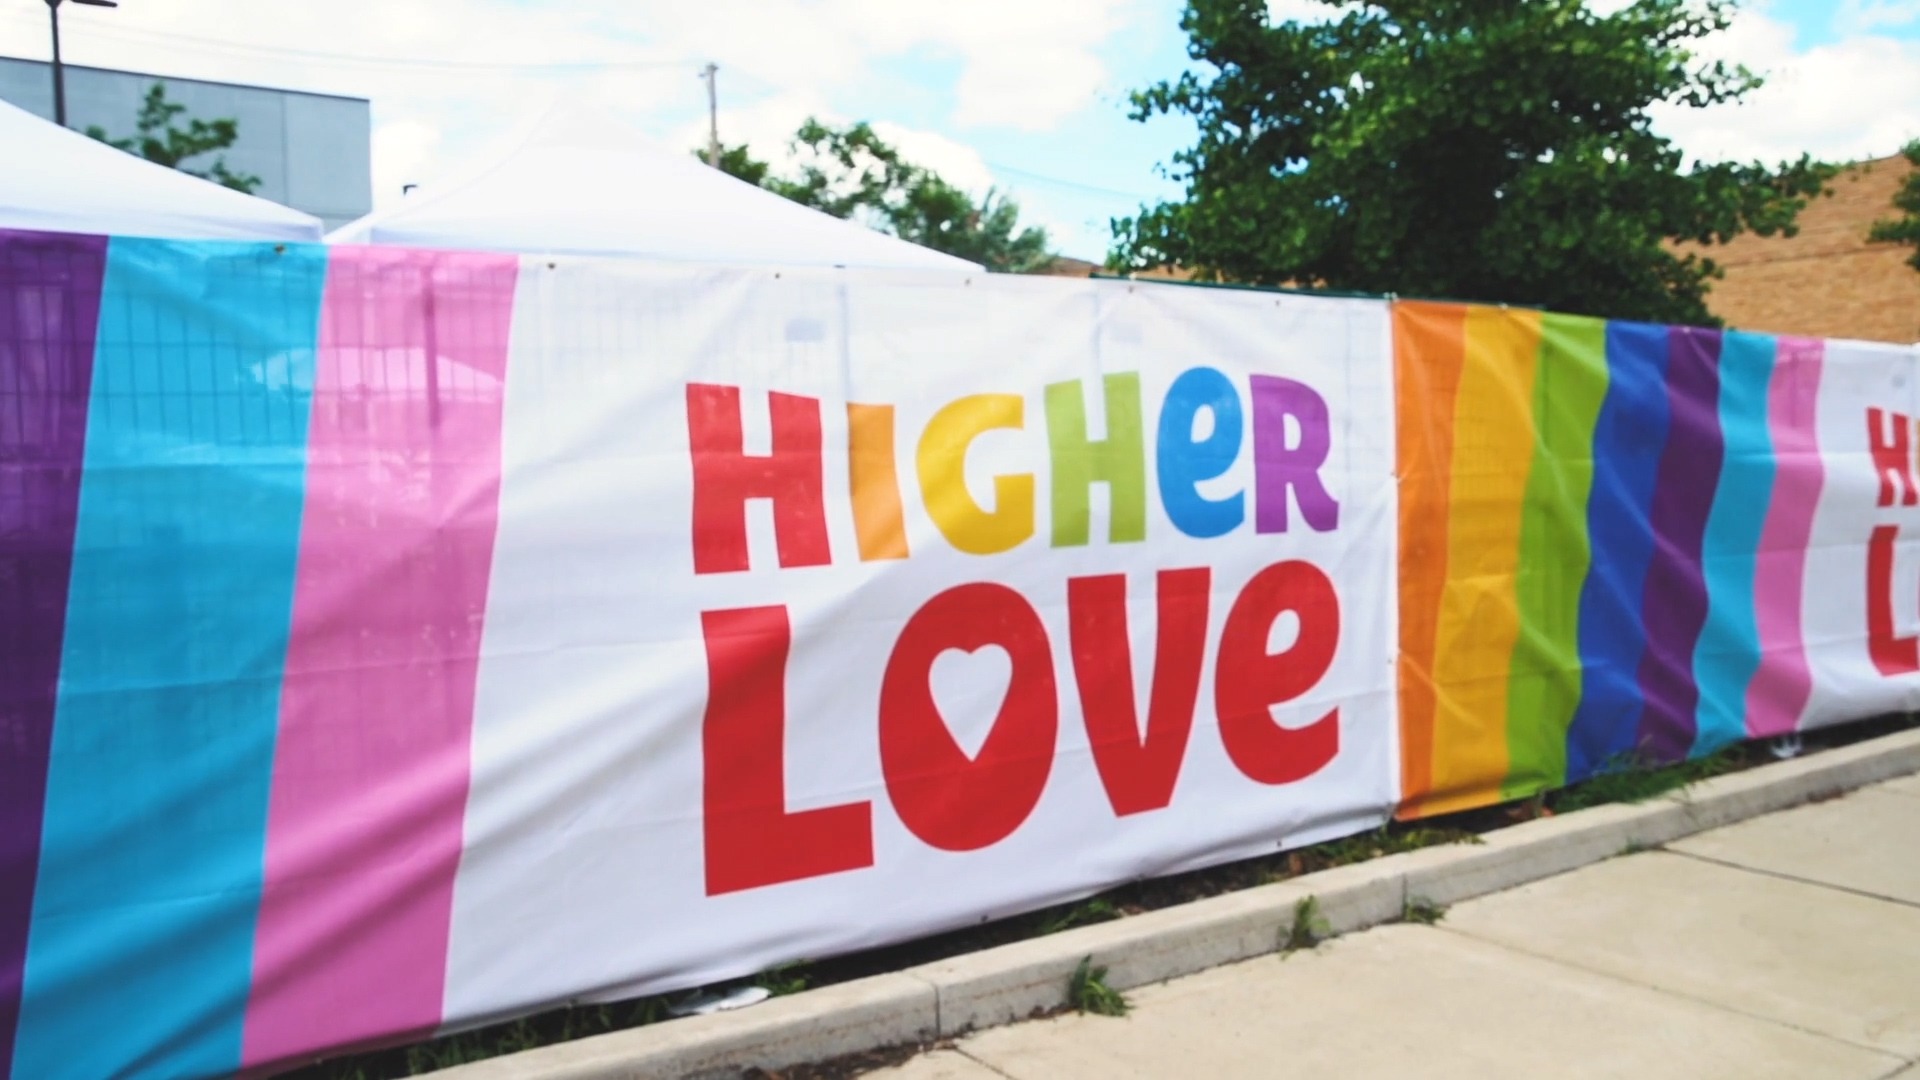 High Minded Events presents Higher Love